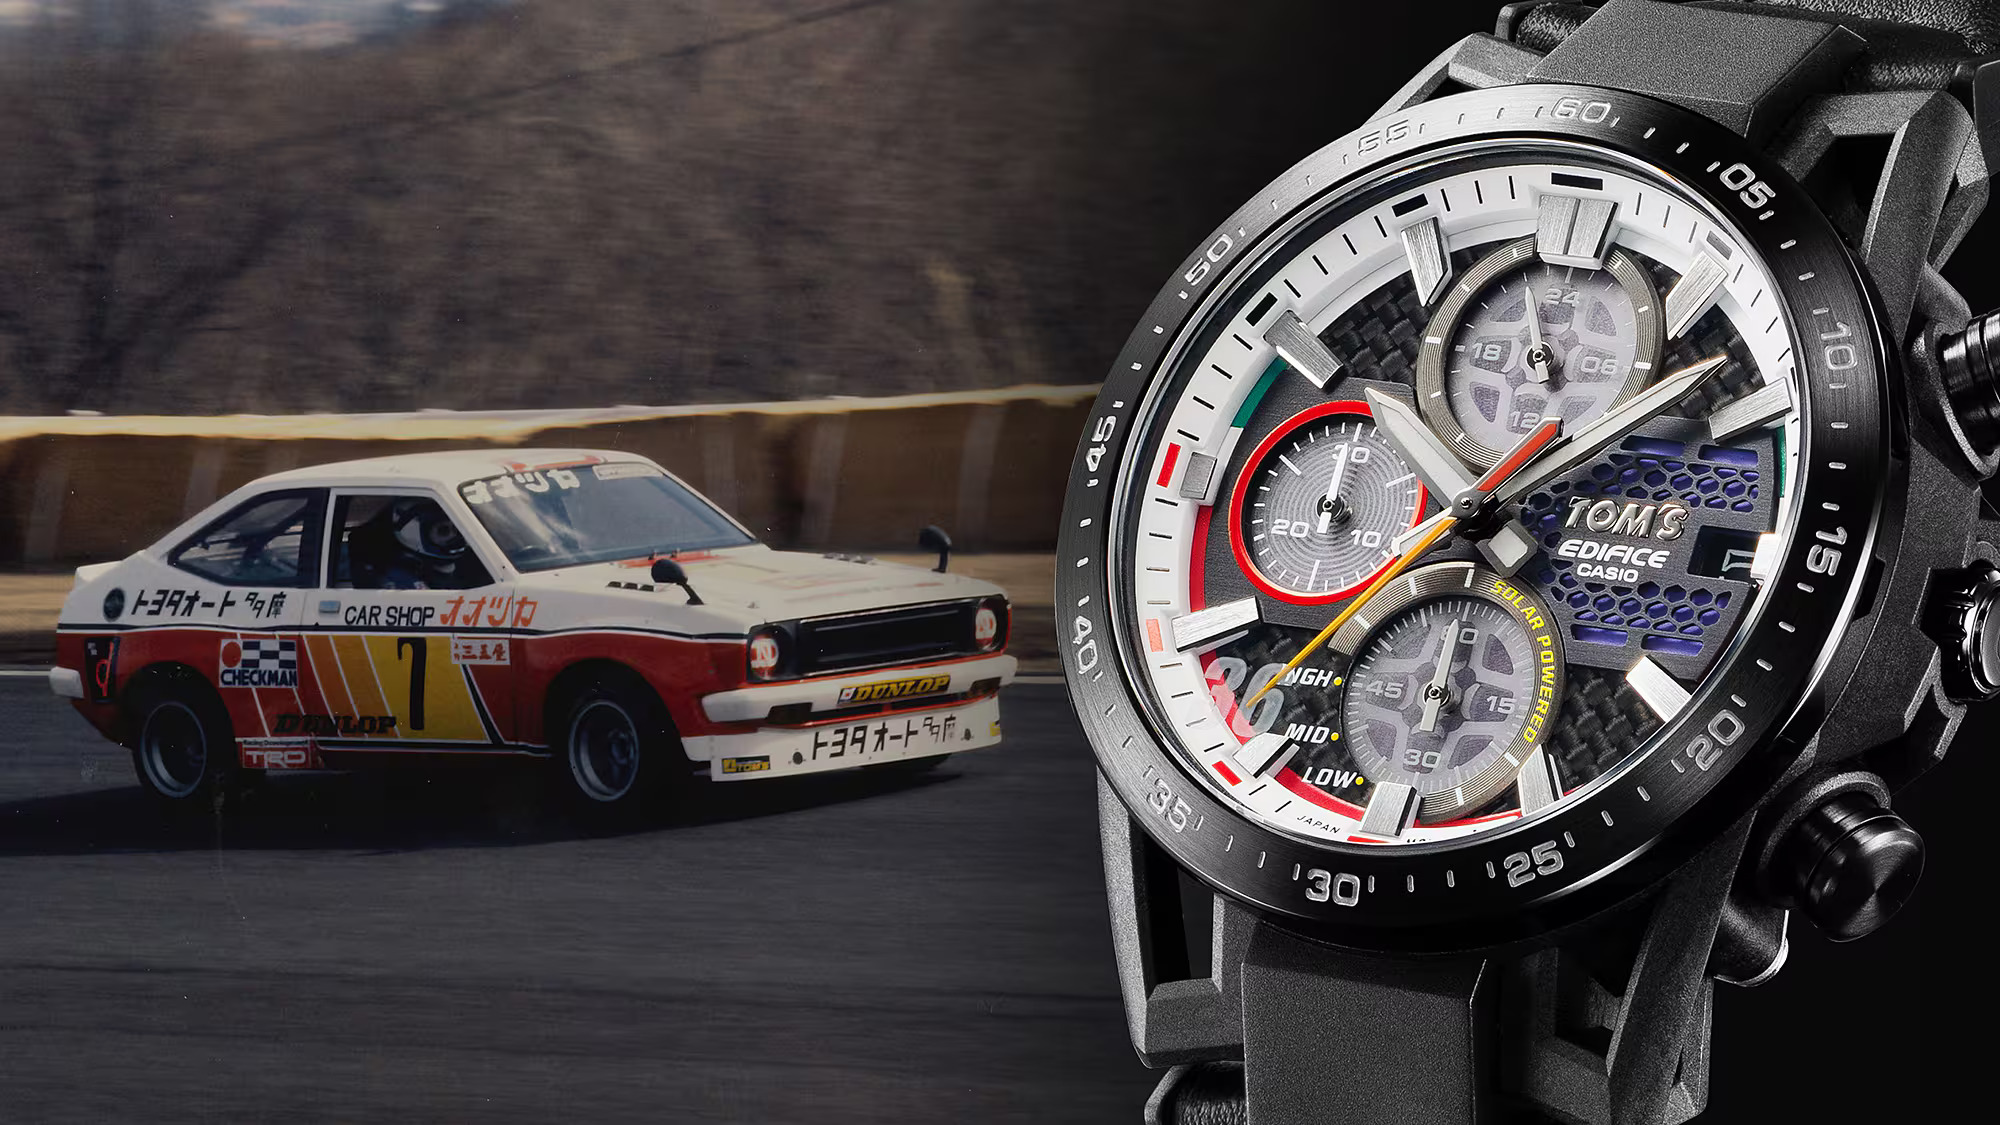 Casio has released the EDIFICE TOM's 50th Anniversary Edition watch to celebrate the 50th anniversary of the Japanese racing team TOM'S (photo)